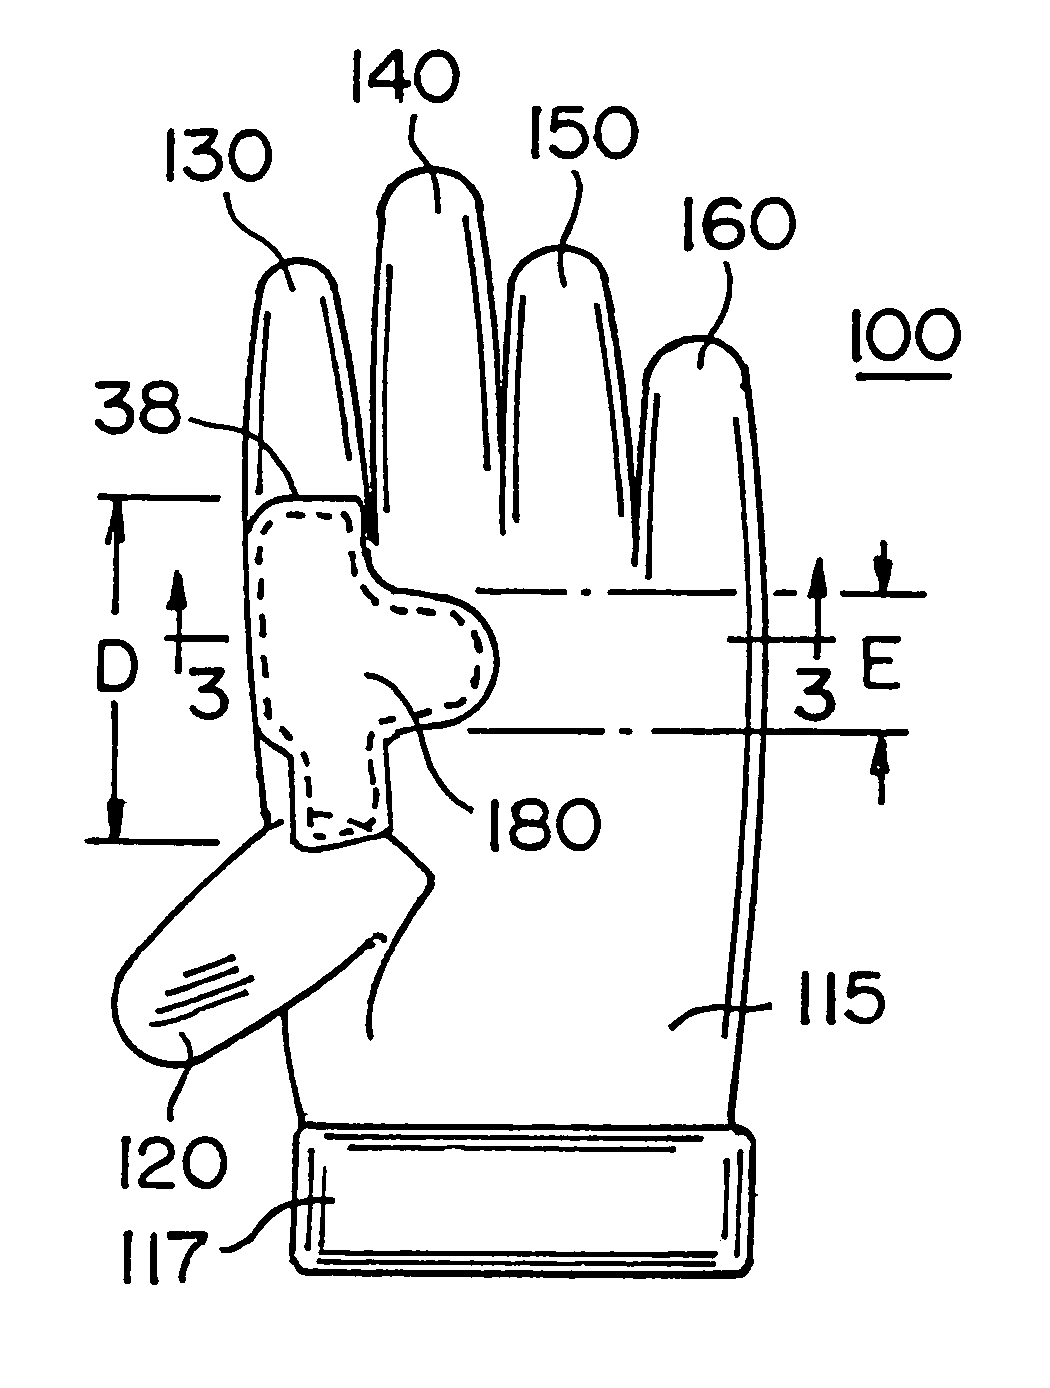 Sports glove with padding